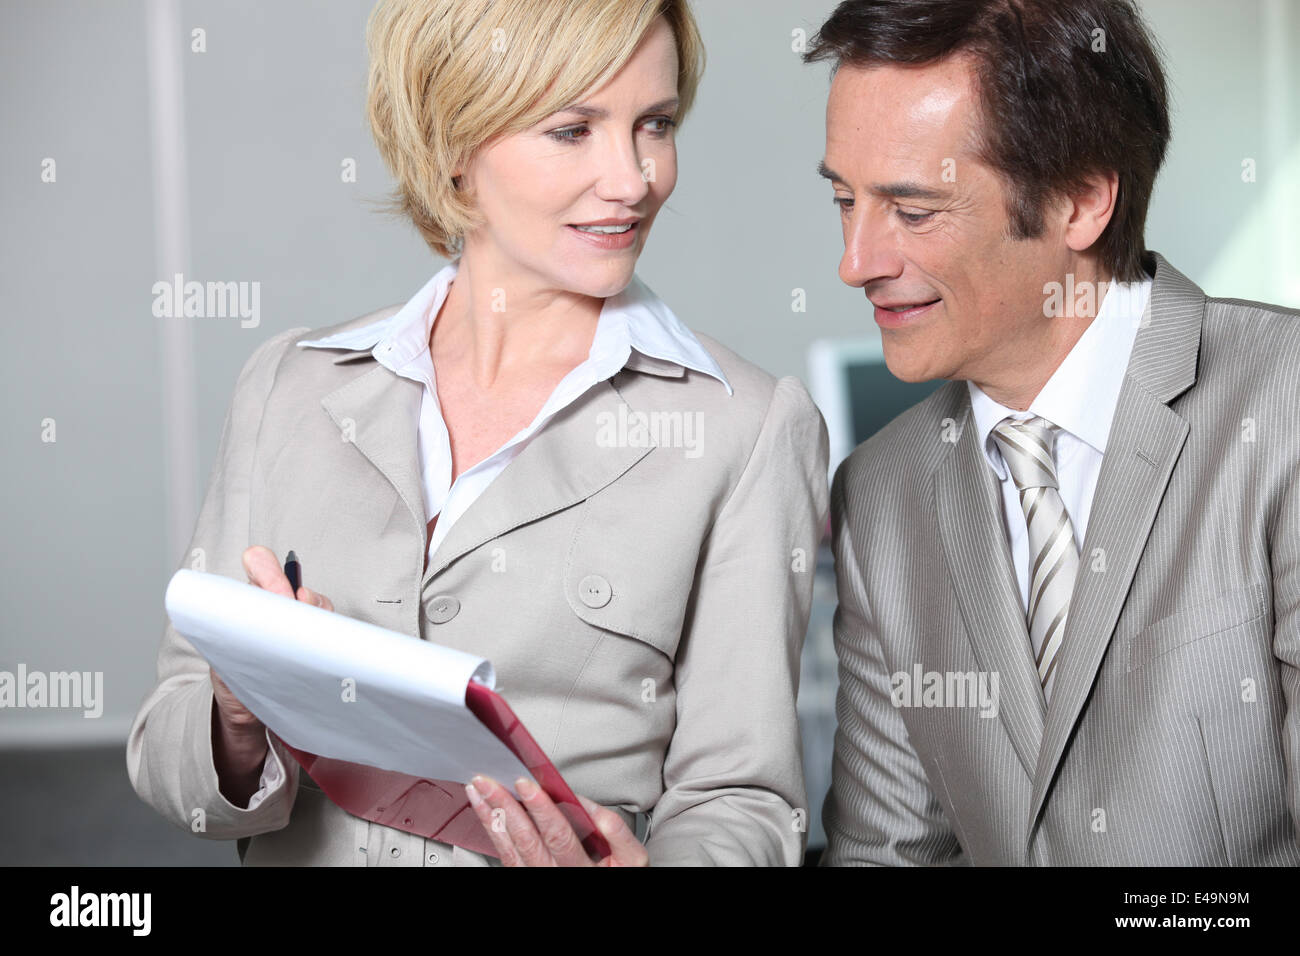 Business colleagues looking at clipboard. Stock Photo